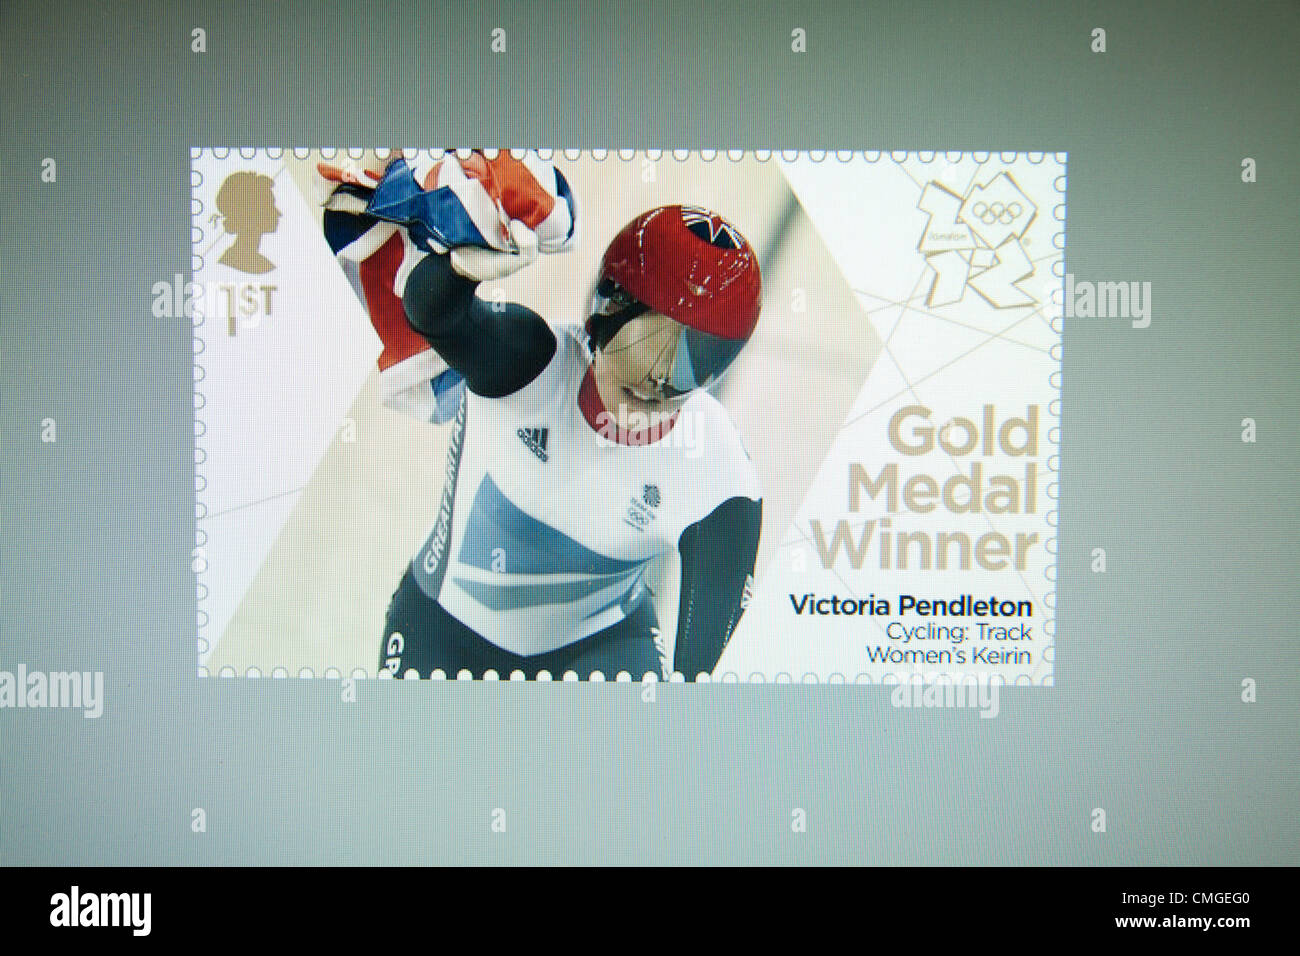 7th August 2012, London 2012. Special edition commemorative stamp of  Victoria Pendleton who claimed the Gold medal in the Women's Keirin Cycling Track. Stock Photo